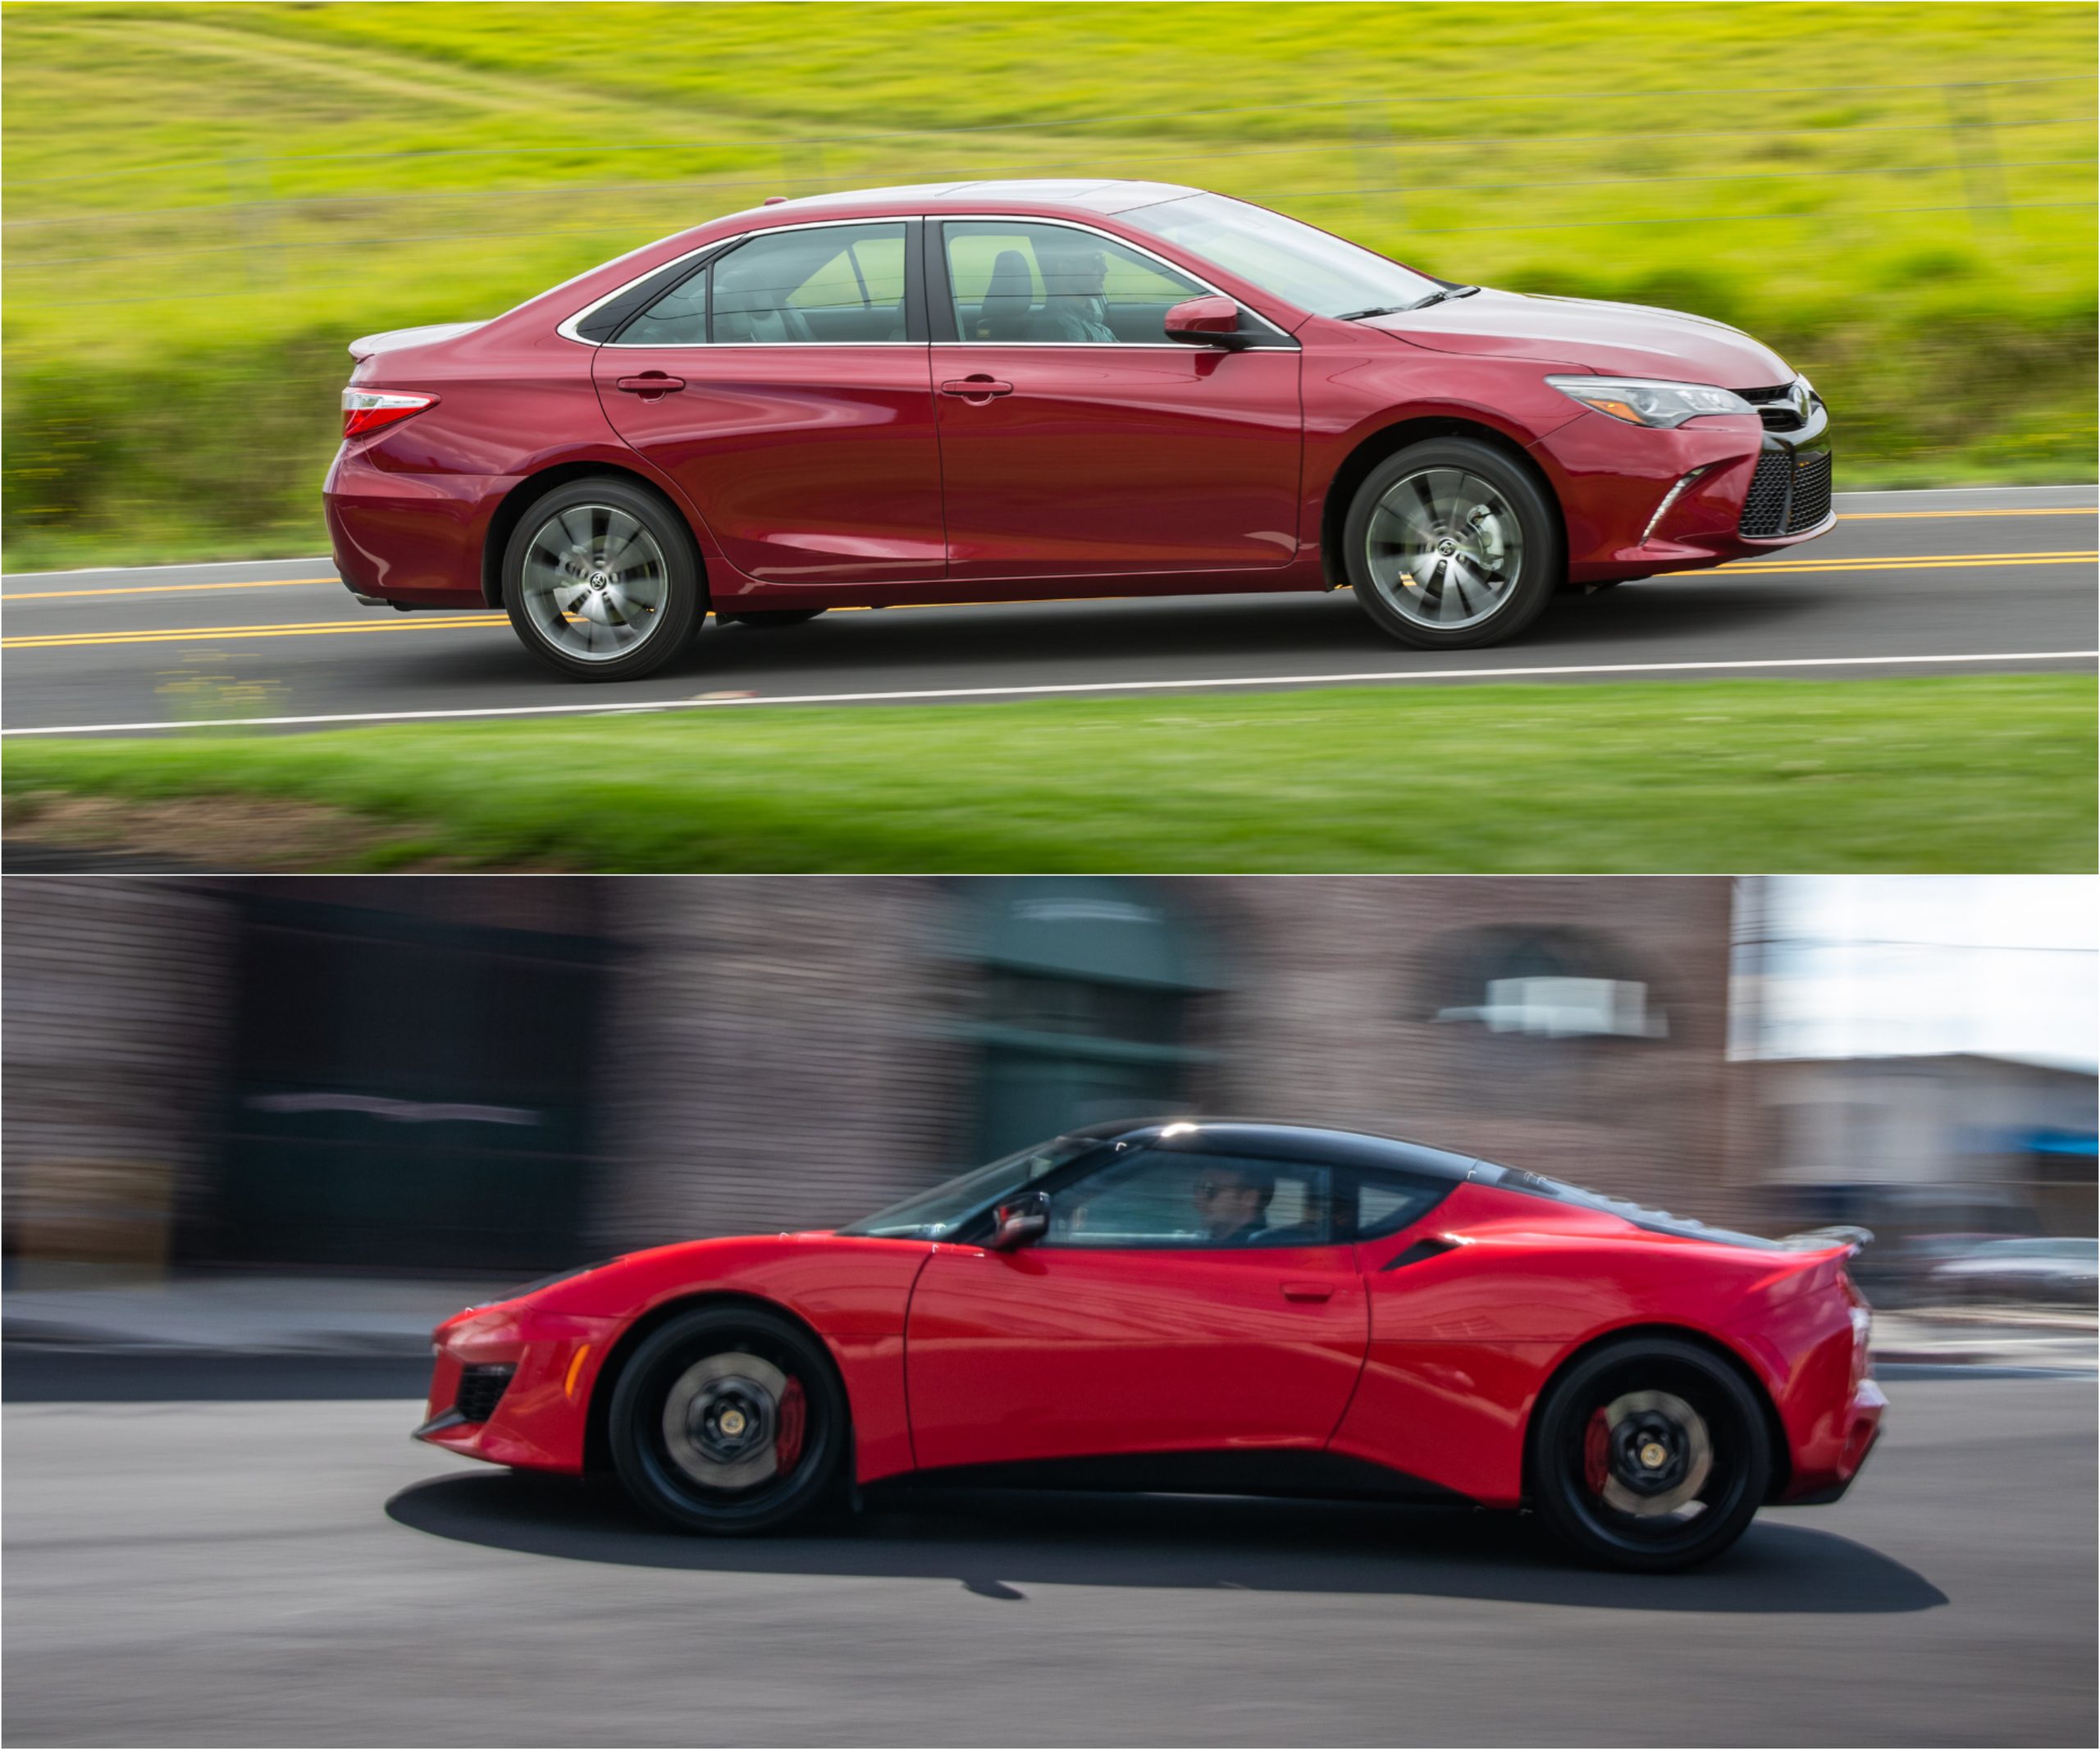 2017 Toyota Camry XSE (Top) and 2017 Lotus Evora (Bottom) Driving